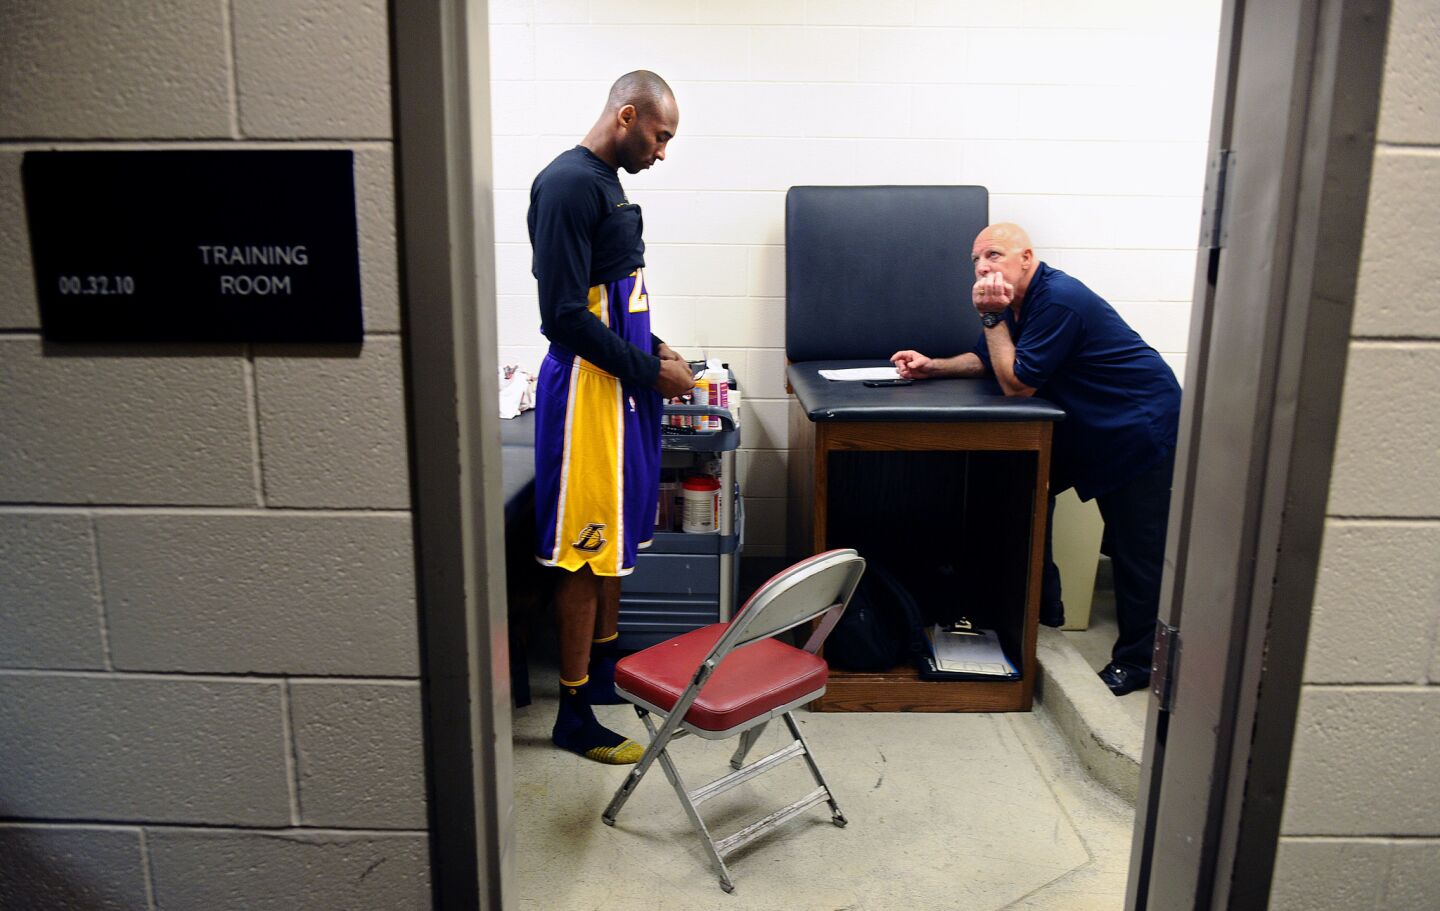 Kobe Bryant prepares for a game with the Rockets in the locker room as trainer Gary Vitti looks on in Houston.